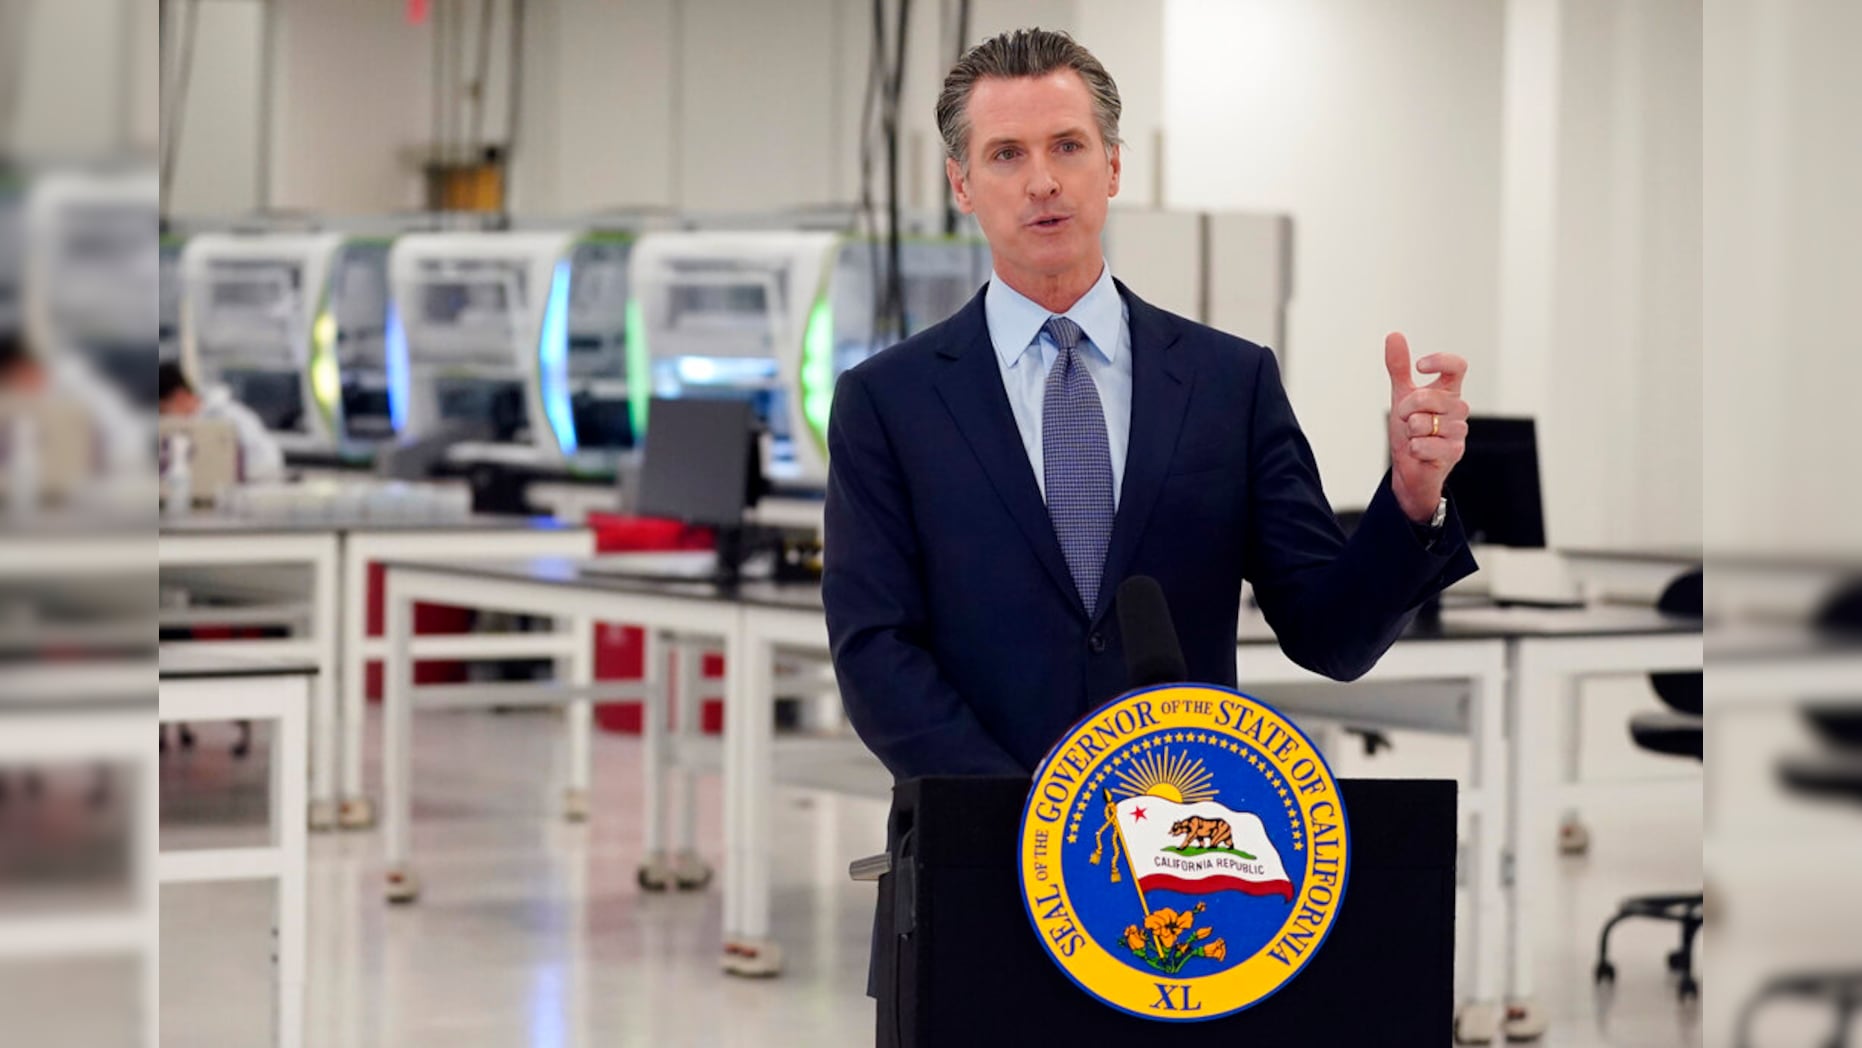 Gov. Newsom imposes new coronavirus restrictions after apologizing for breaking his own rules to attend party